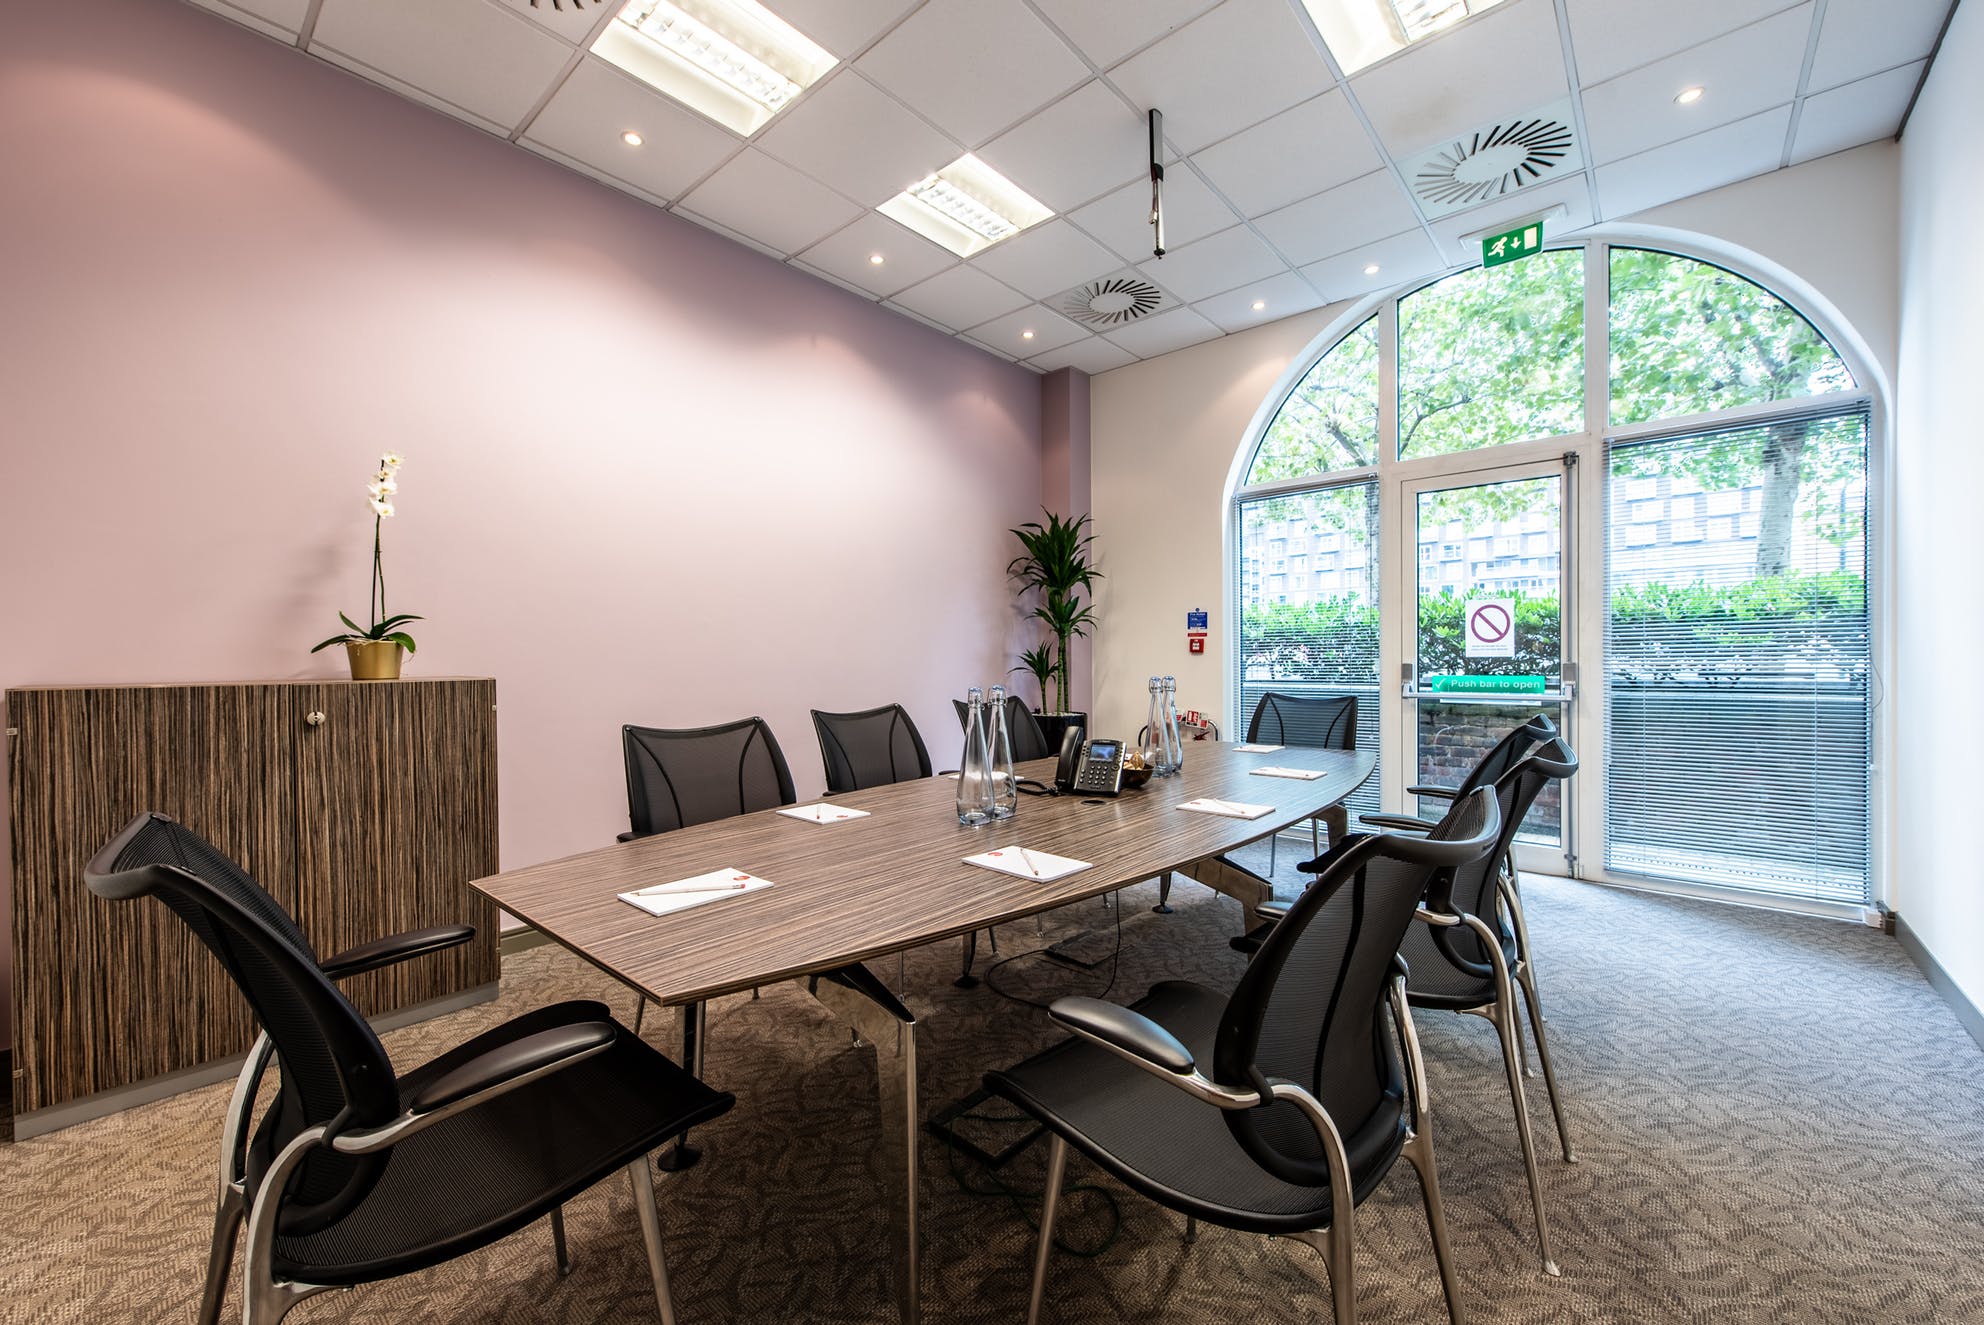 Looking for the perfect serviced office space in London?